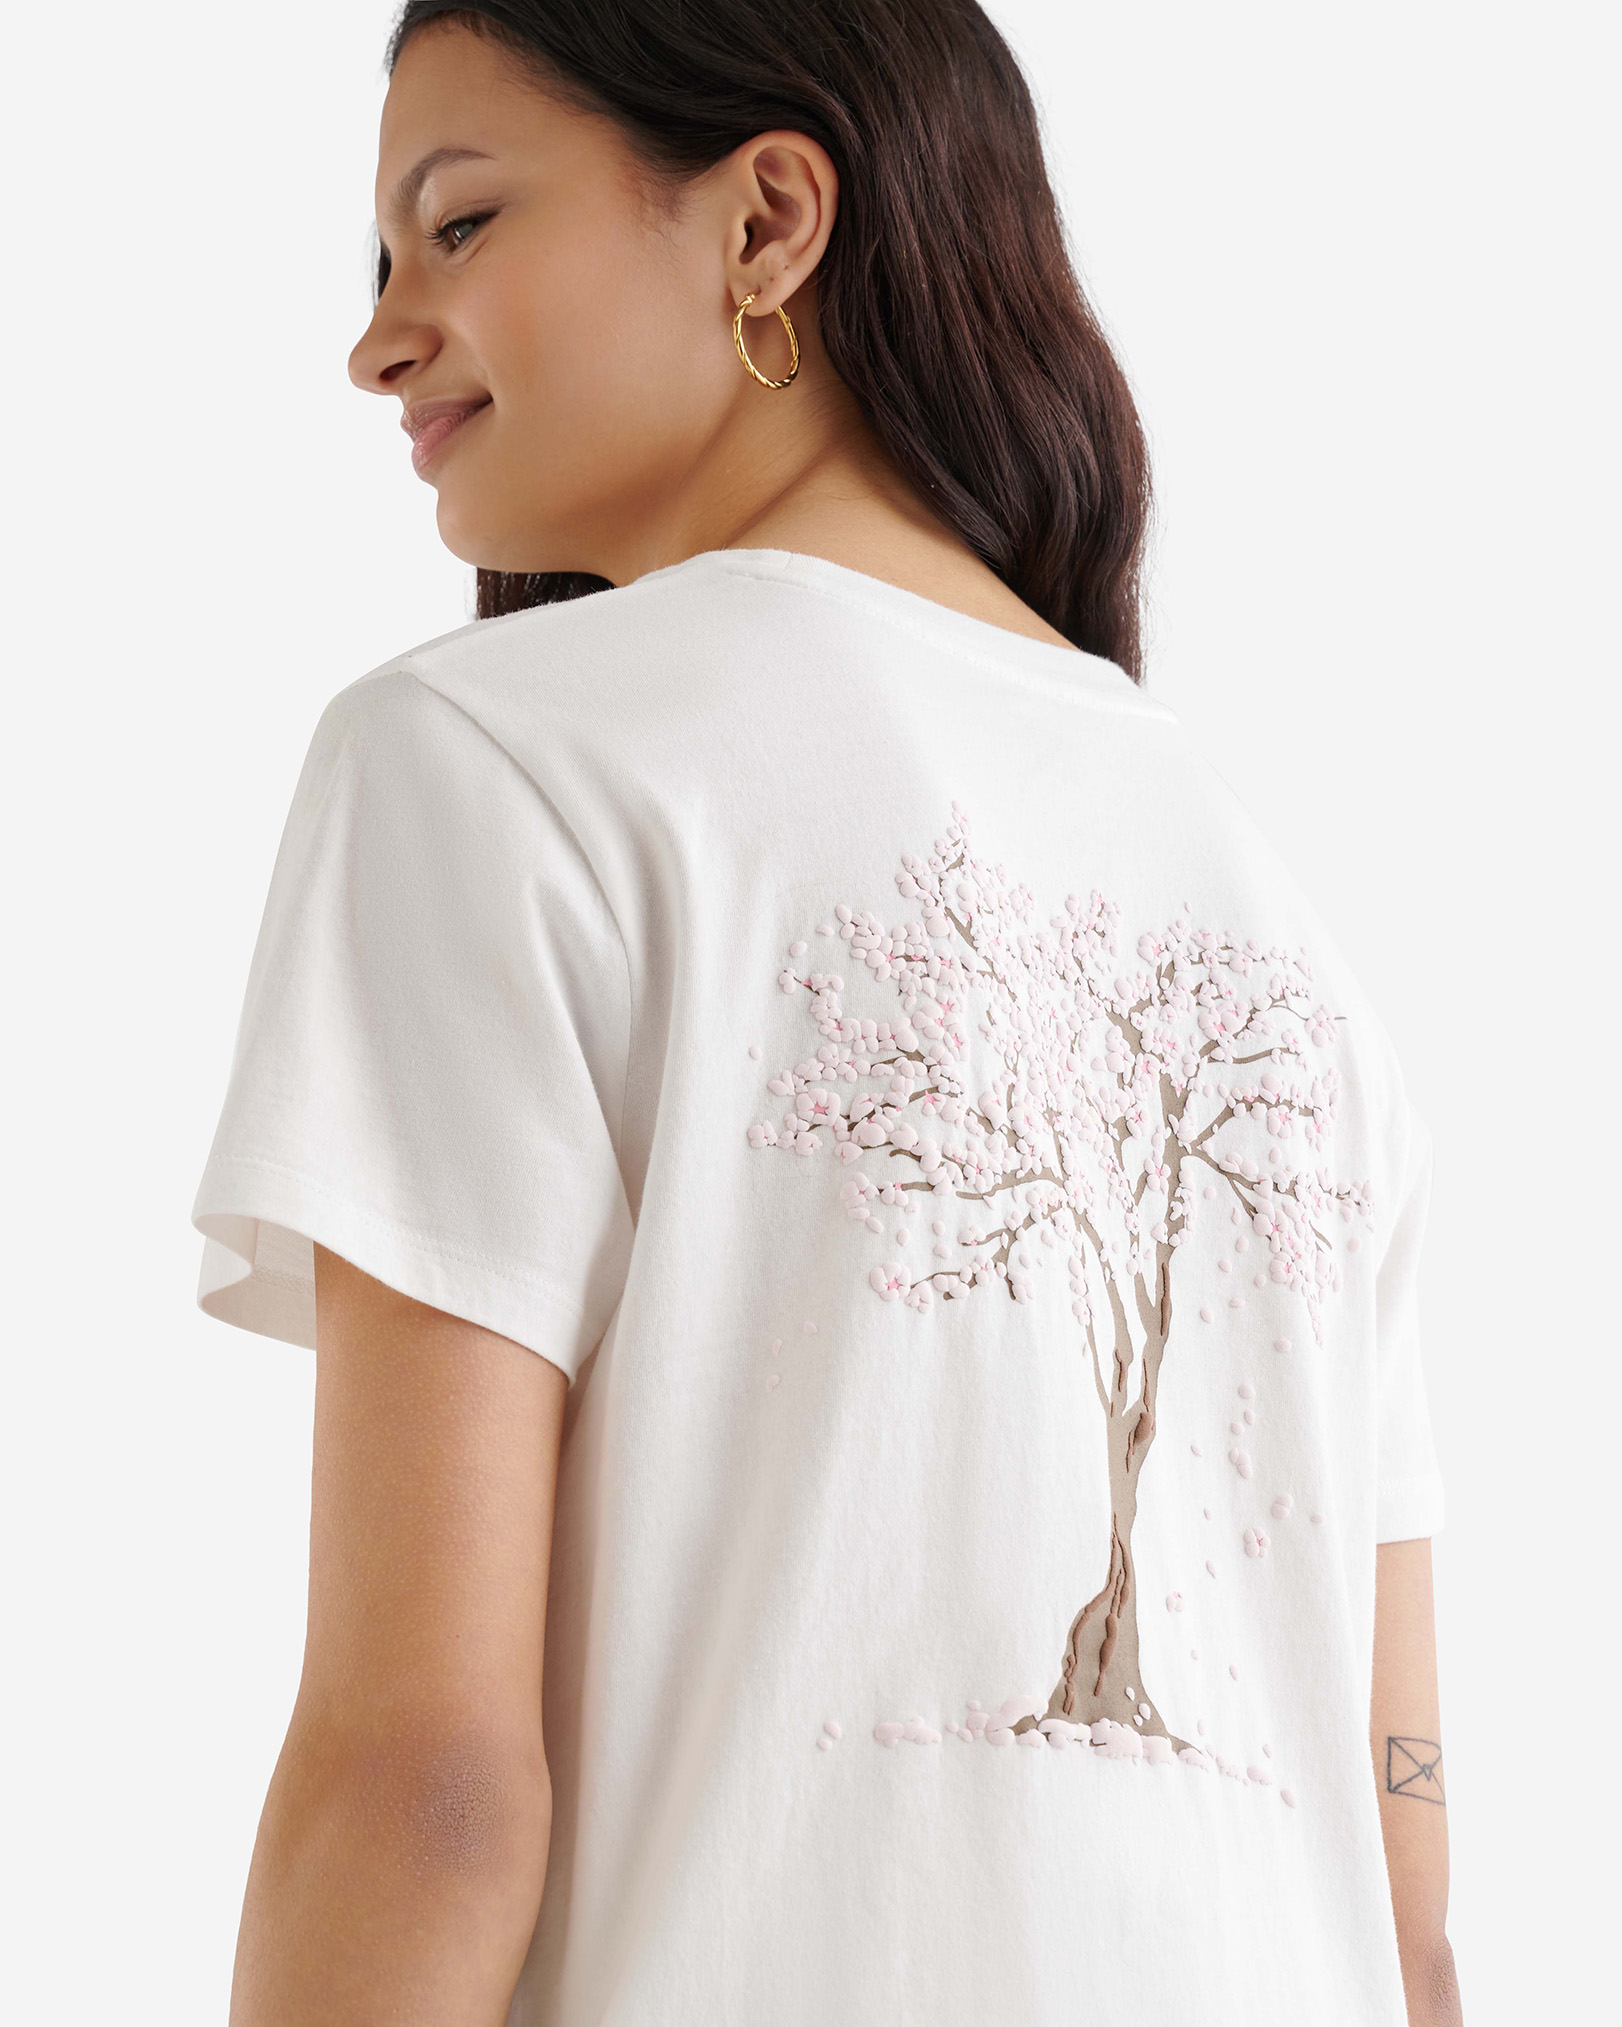 Roots Women's Blossom T-Shirt in Egret